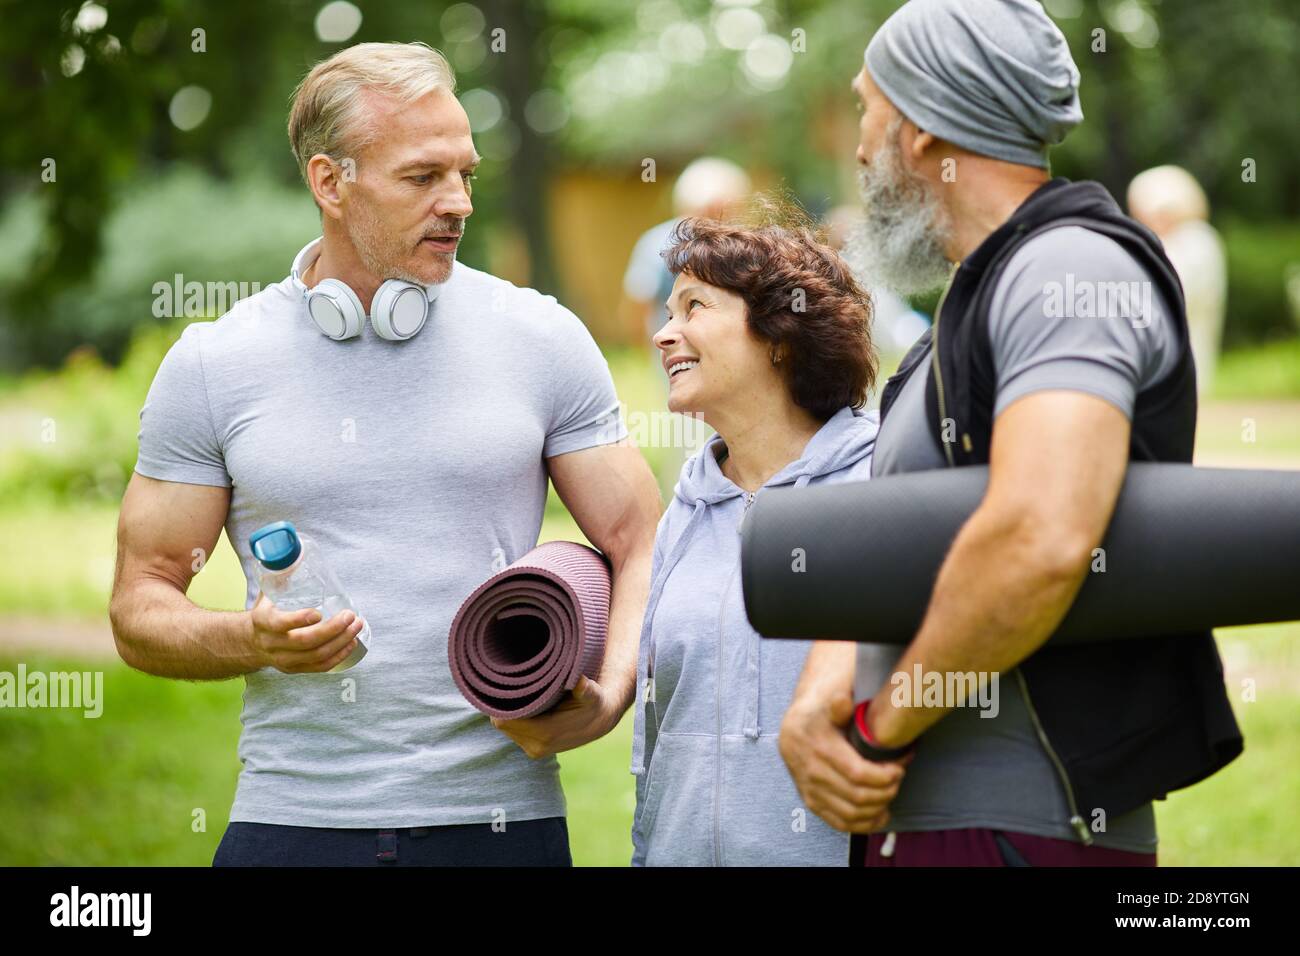 Two sporty mature men and woman standing together in park discussing something before doing exercise Stock Photo